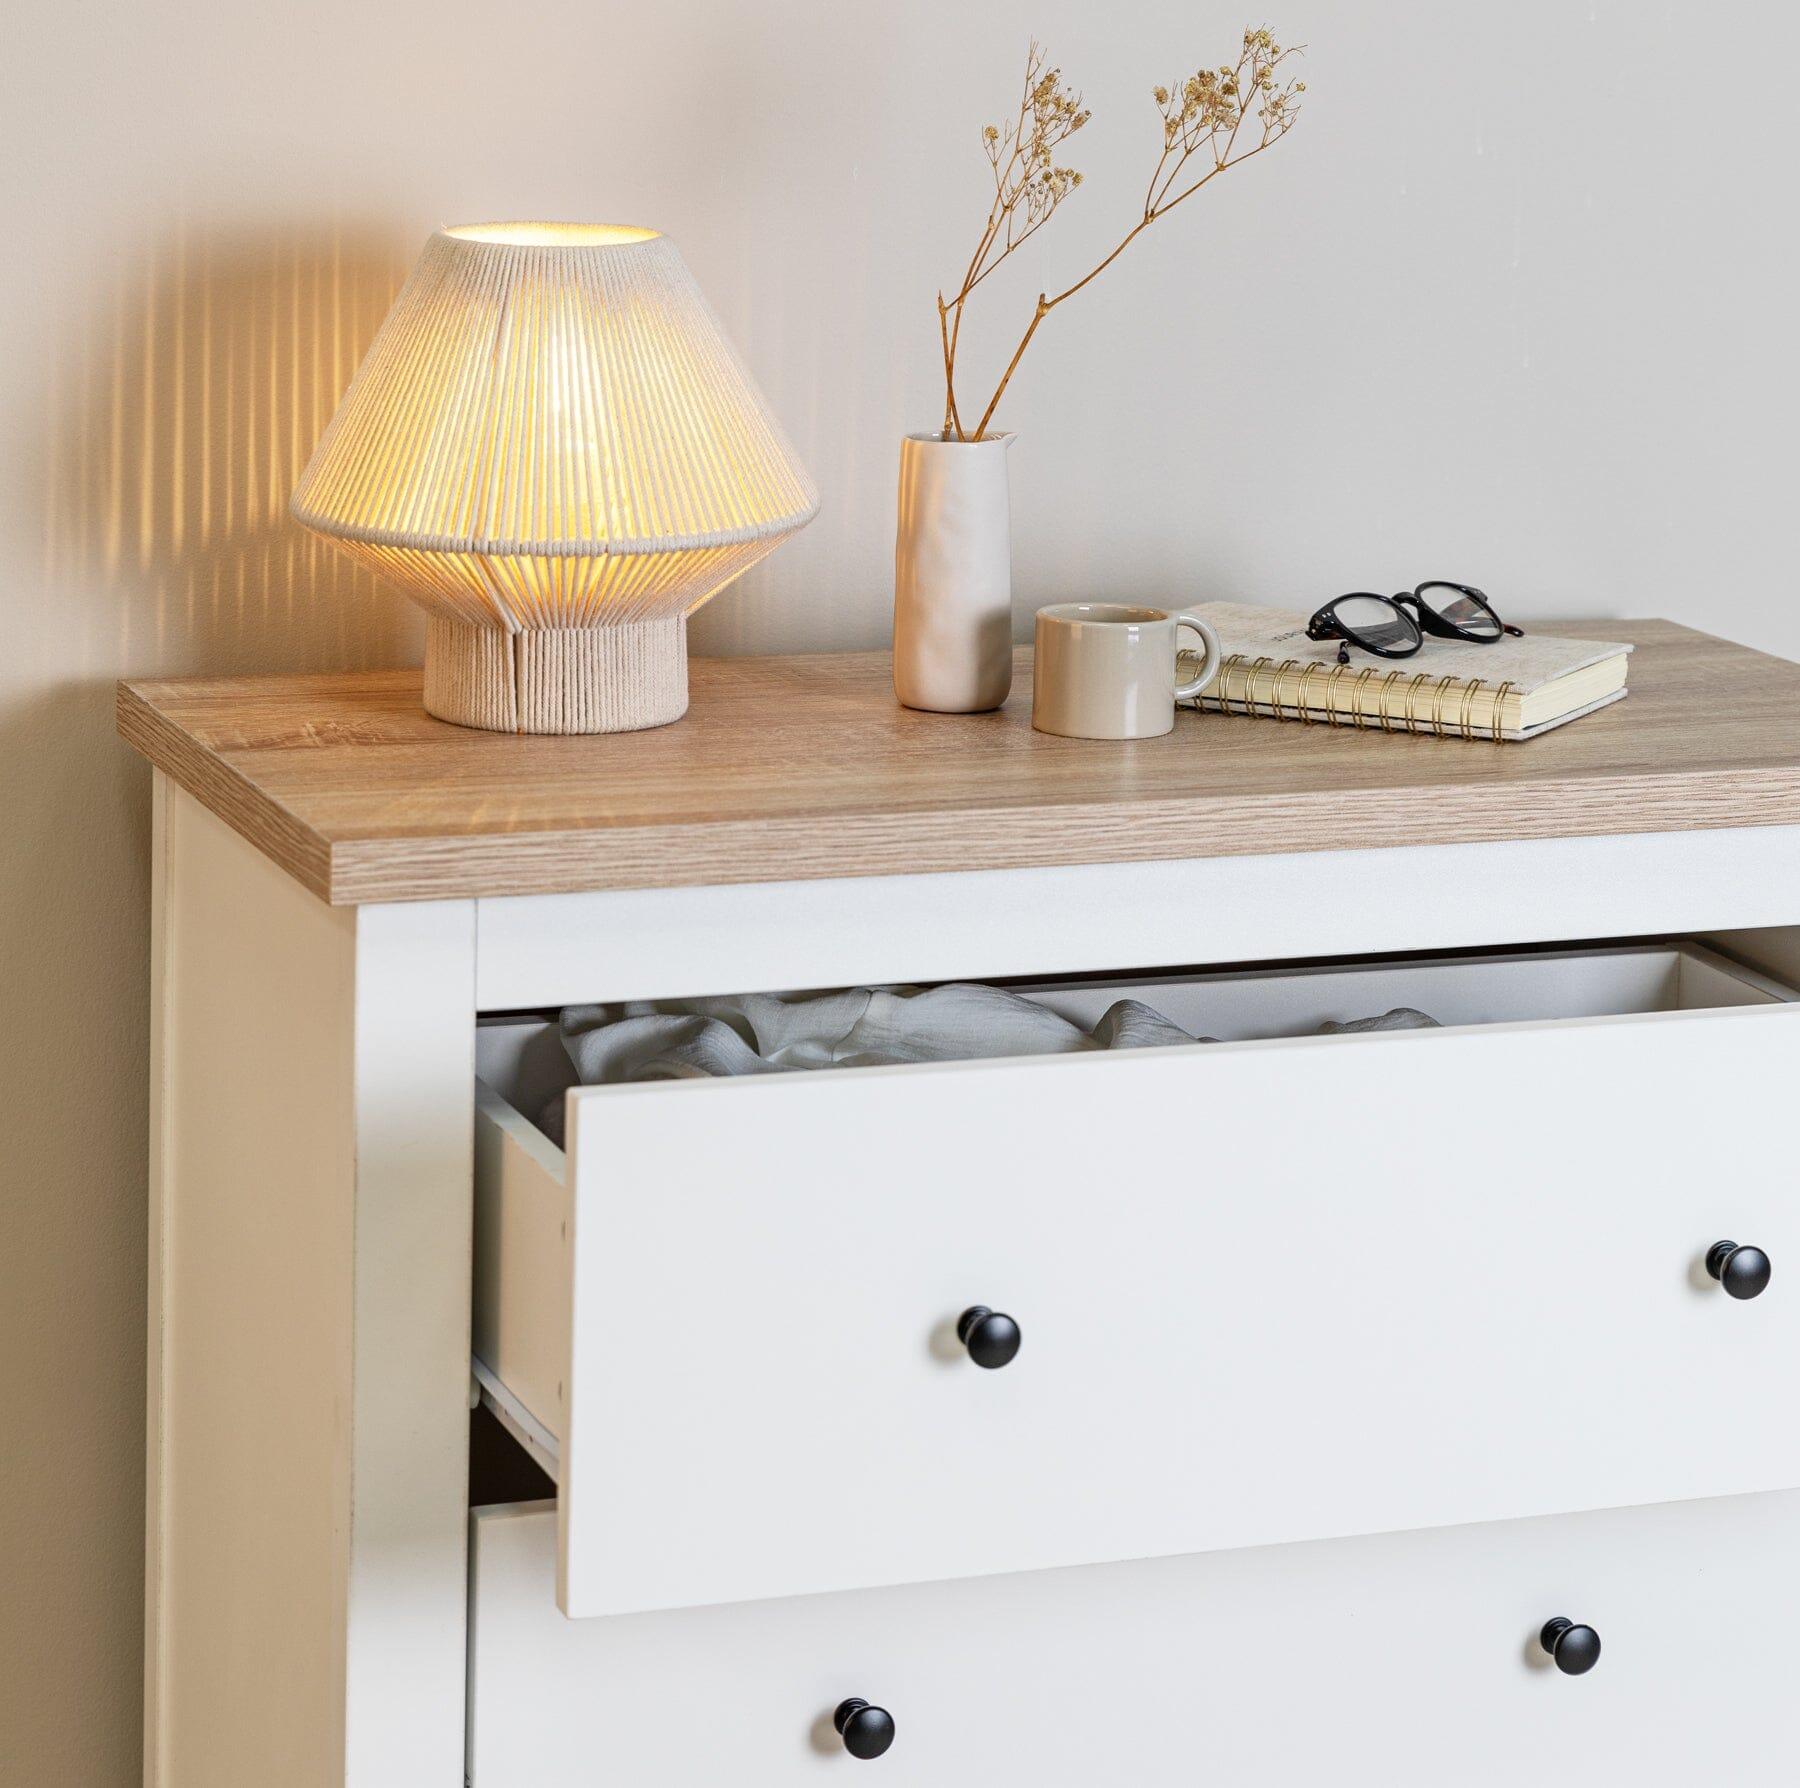 Bampton Tall 4 Drawer chest of drawers - alabaster white - Laura James